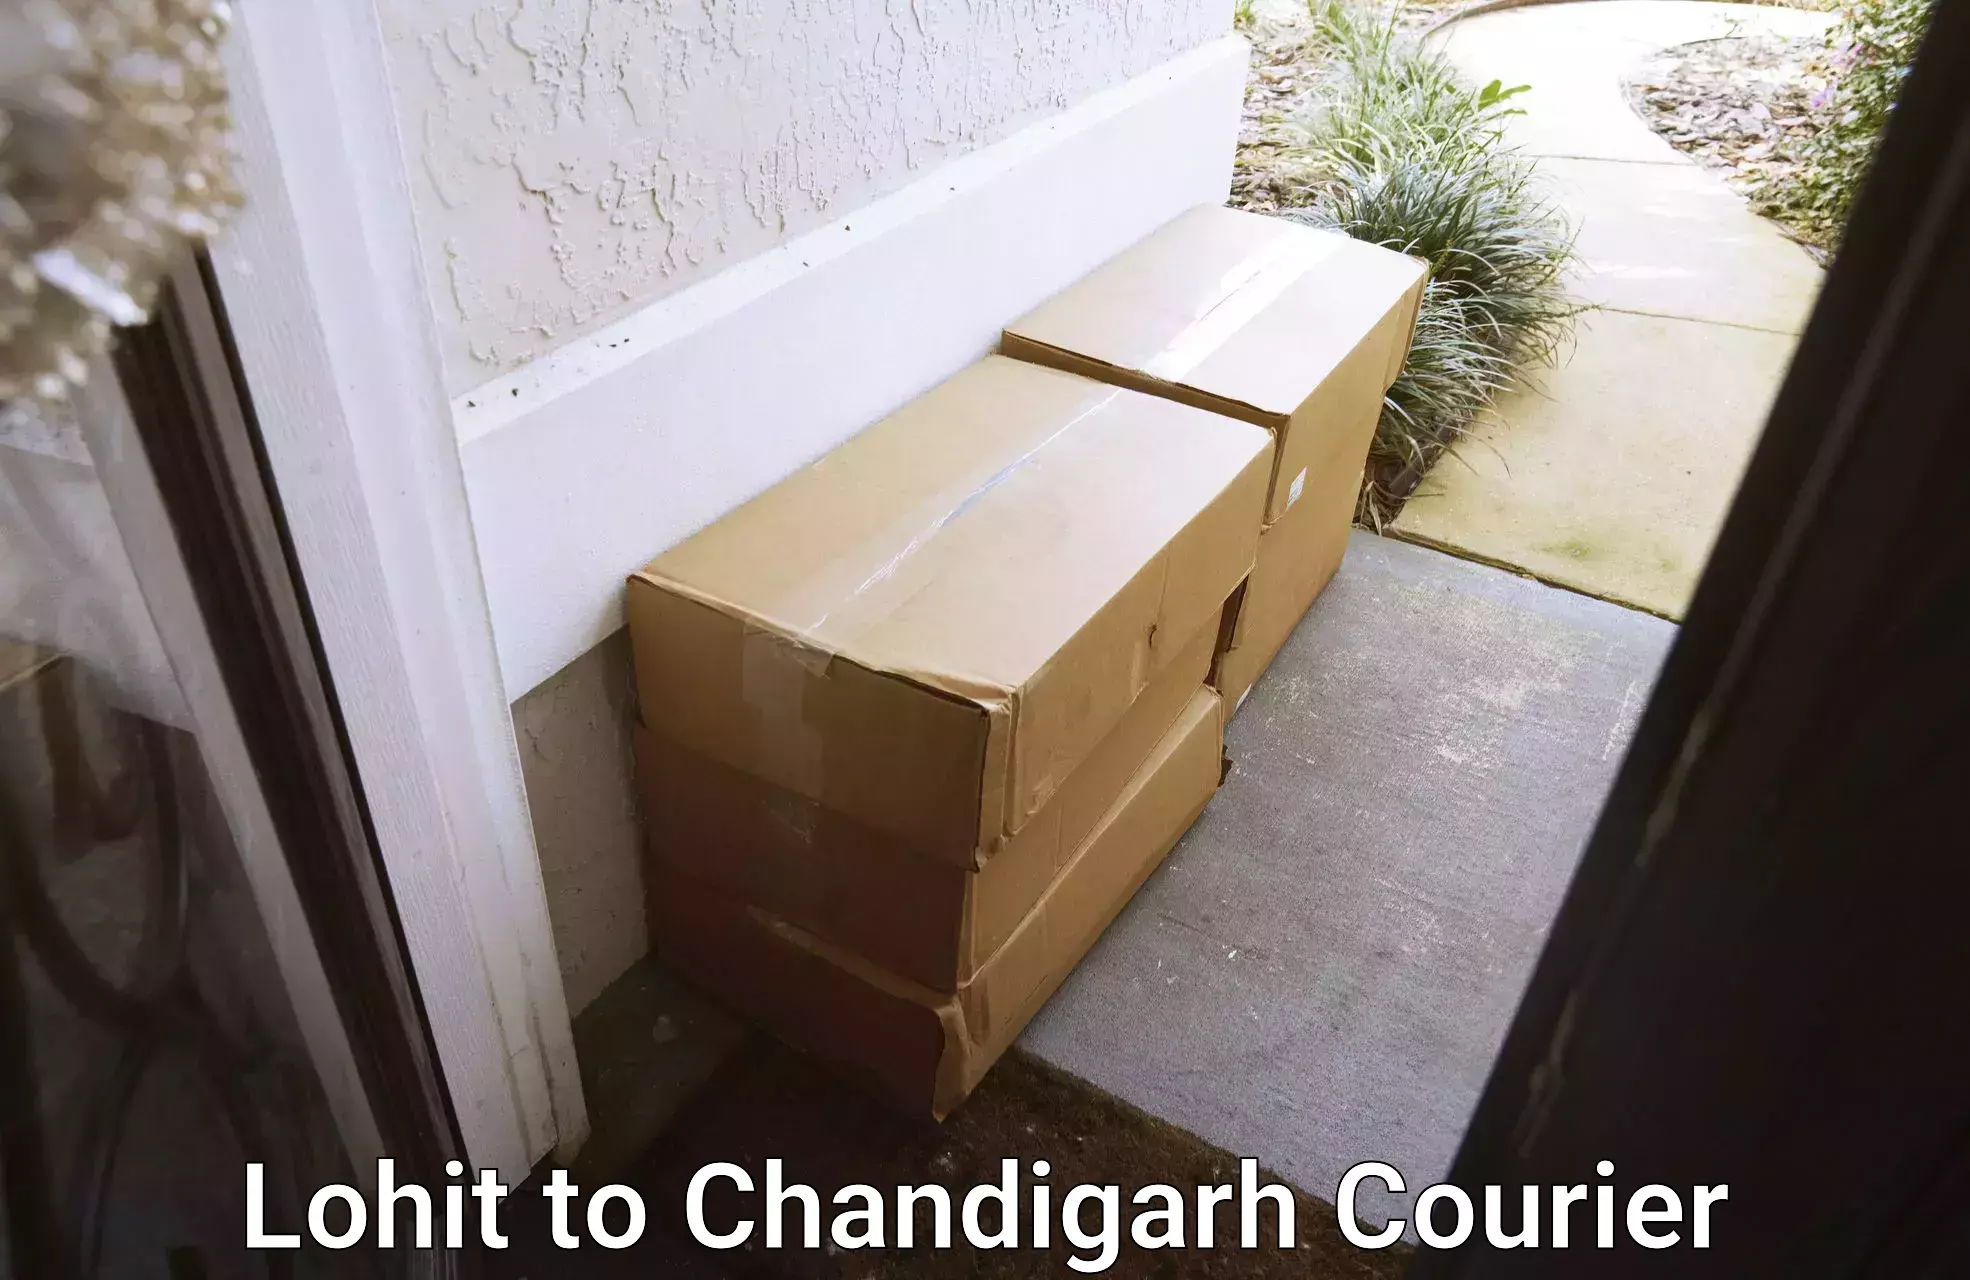 Sustainable delivery practices in Lohit to Chandigarh